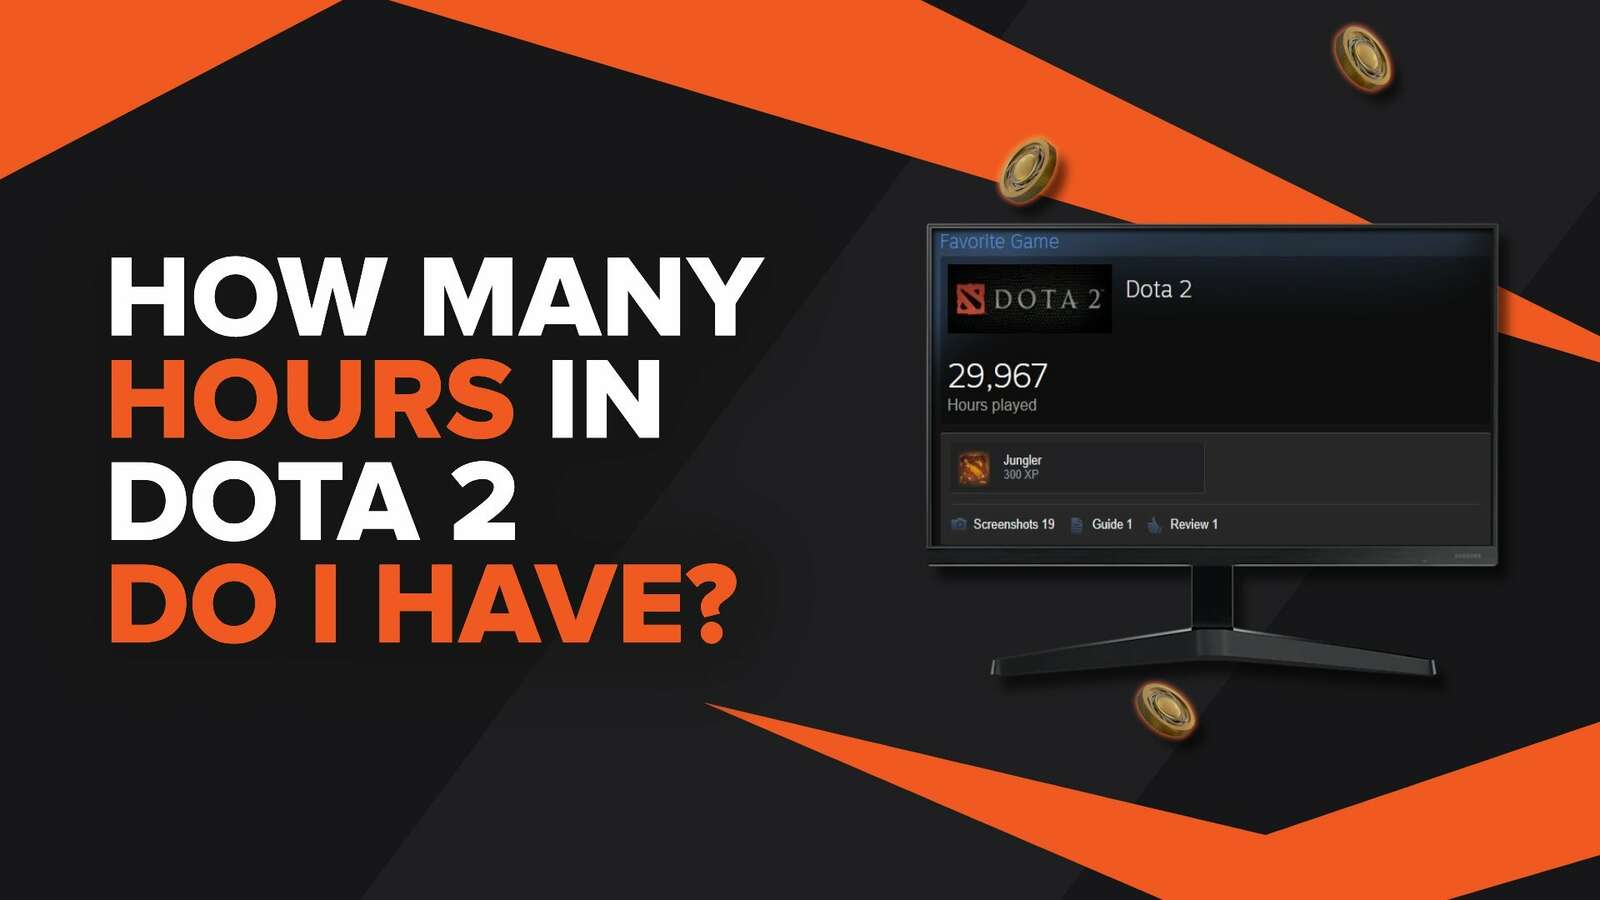 How Many Hours in Dota 2 do I have?